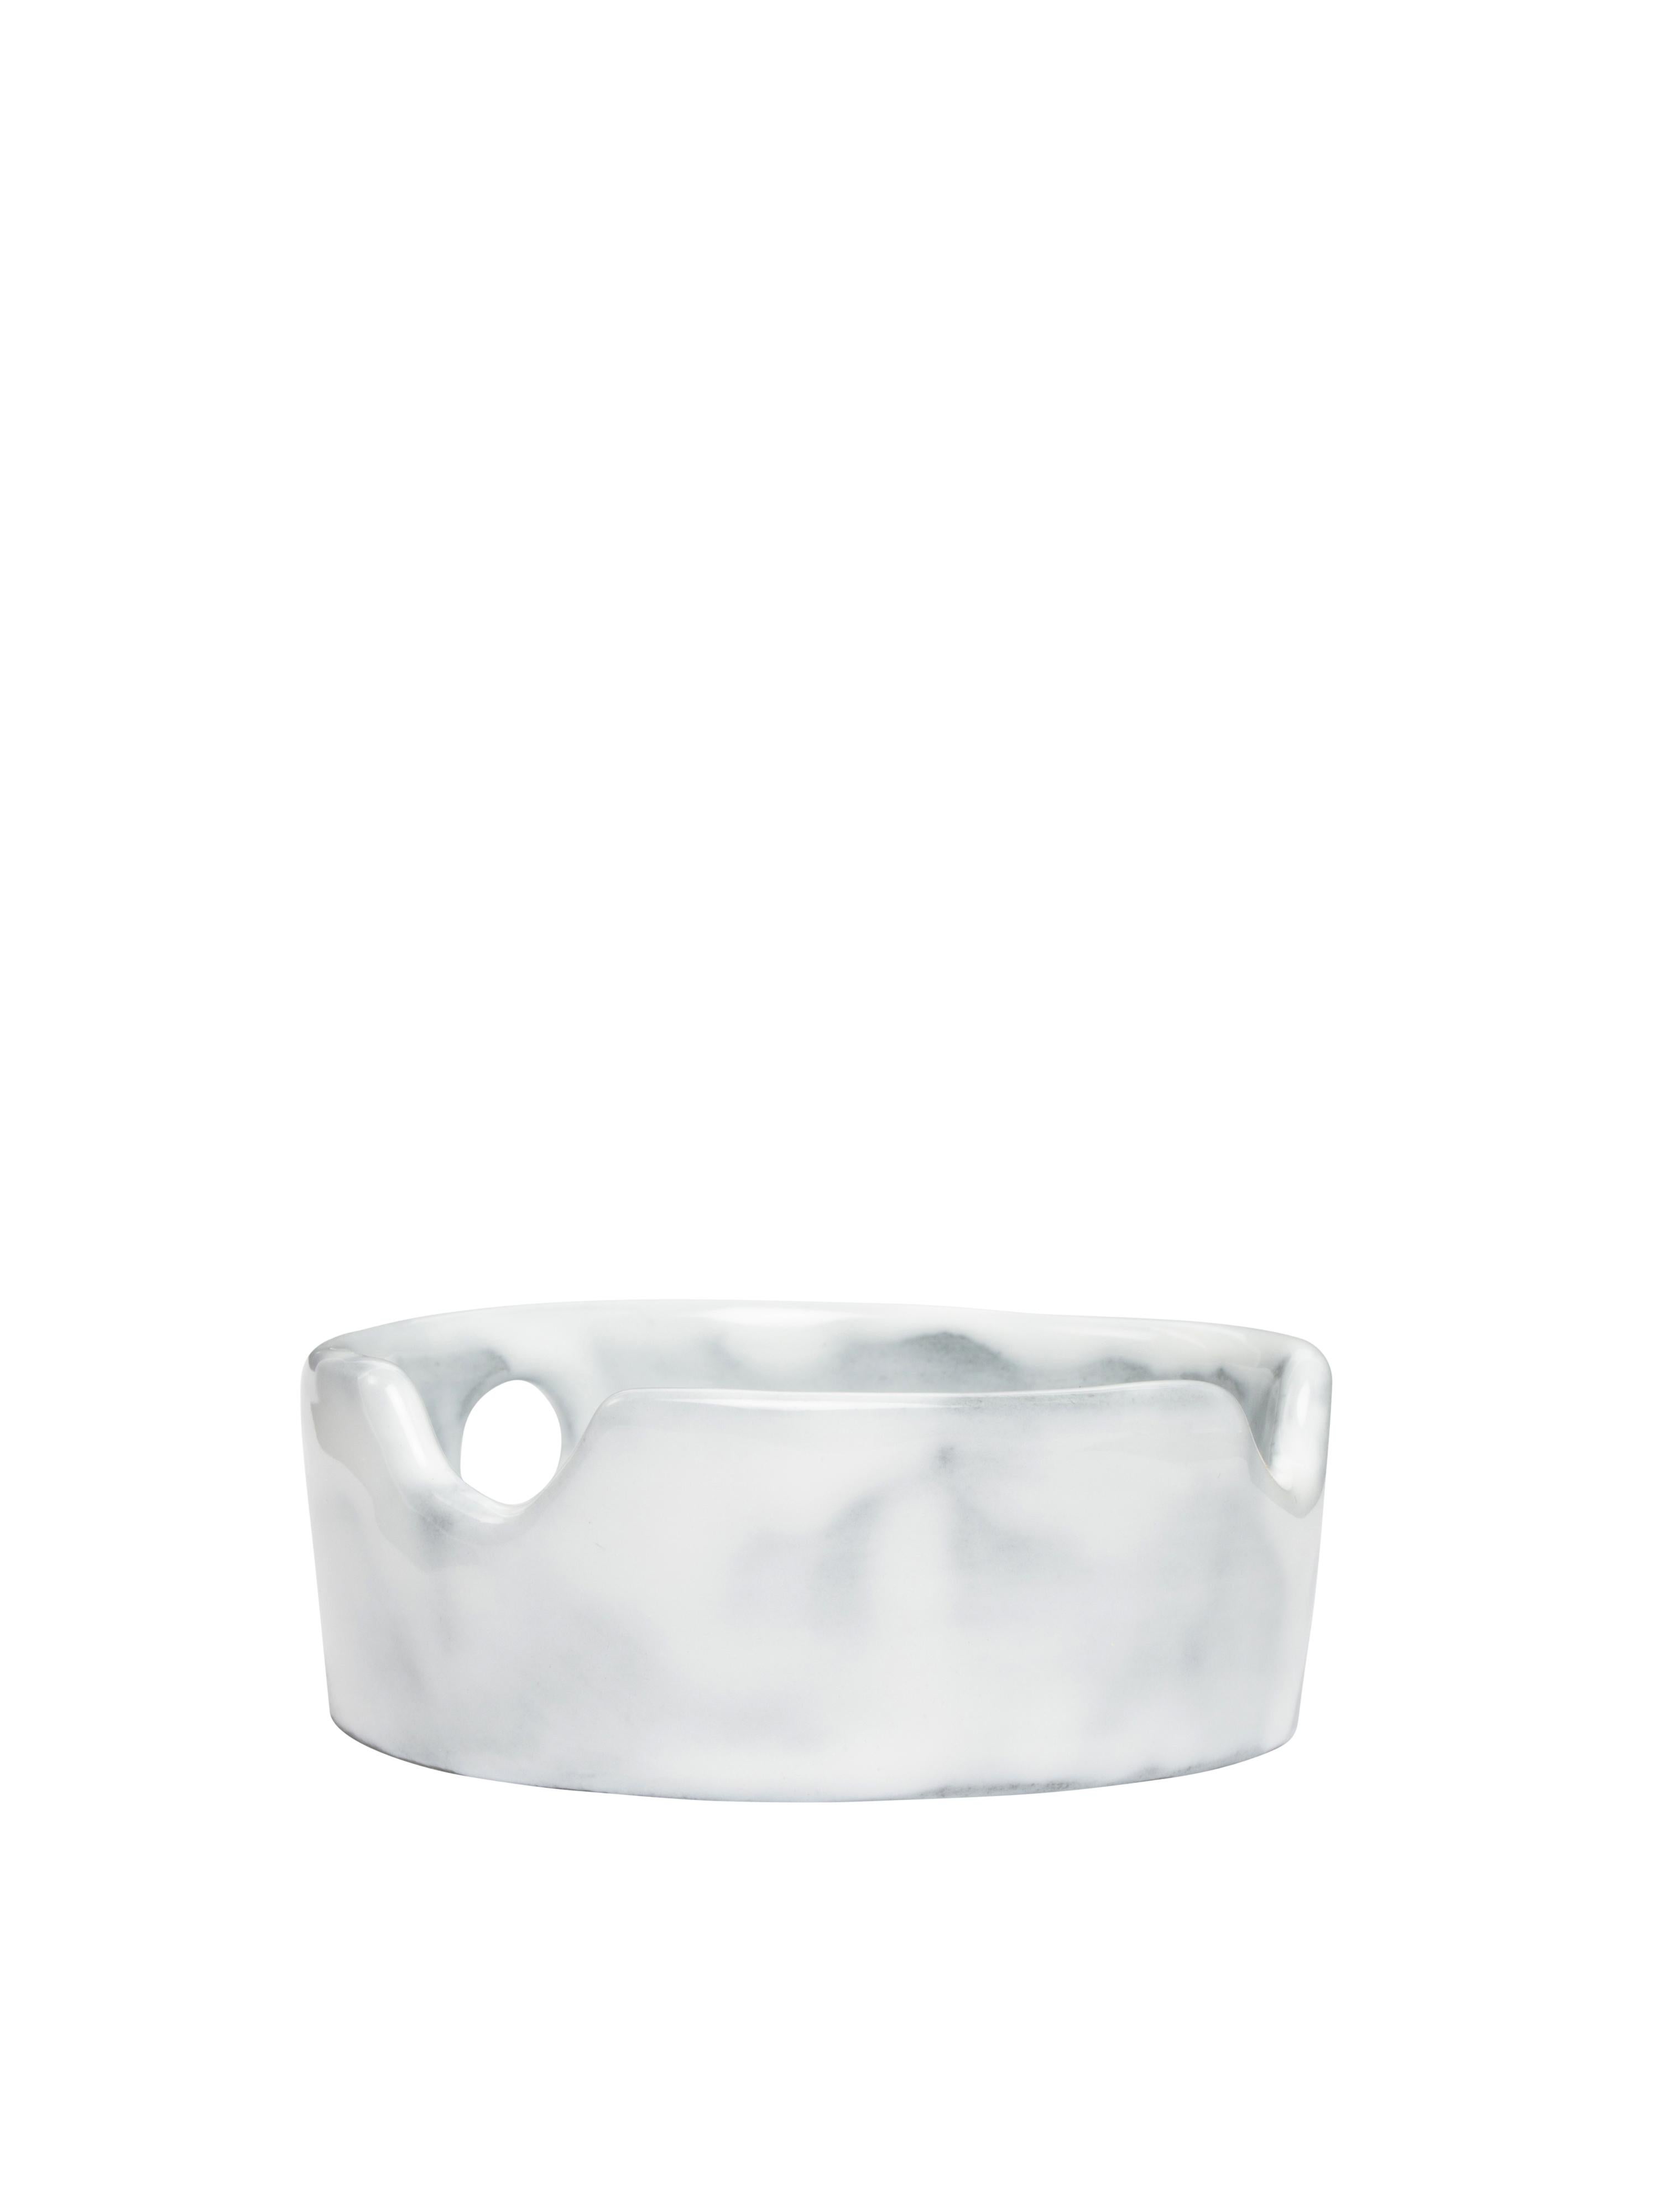 Off-White Glossy Ceramics Ashtray Taupe No Color For Sale